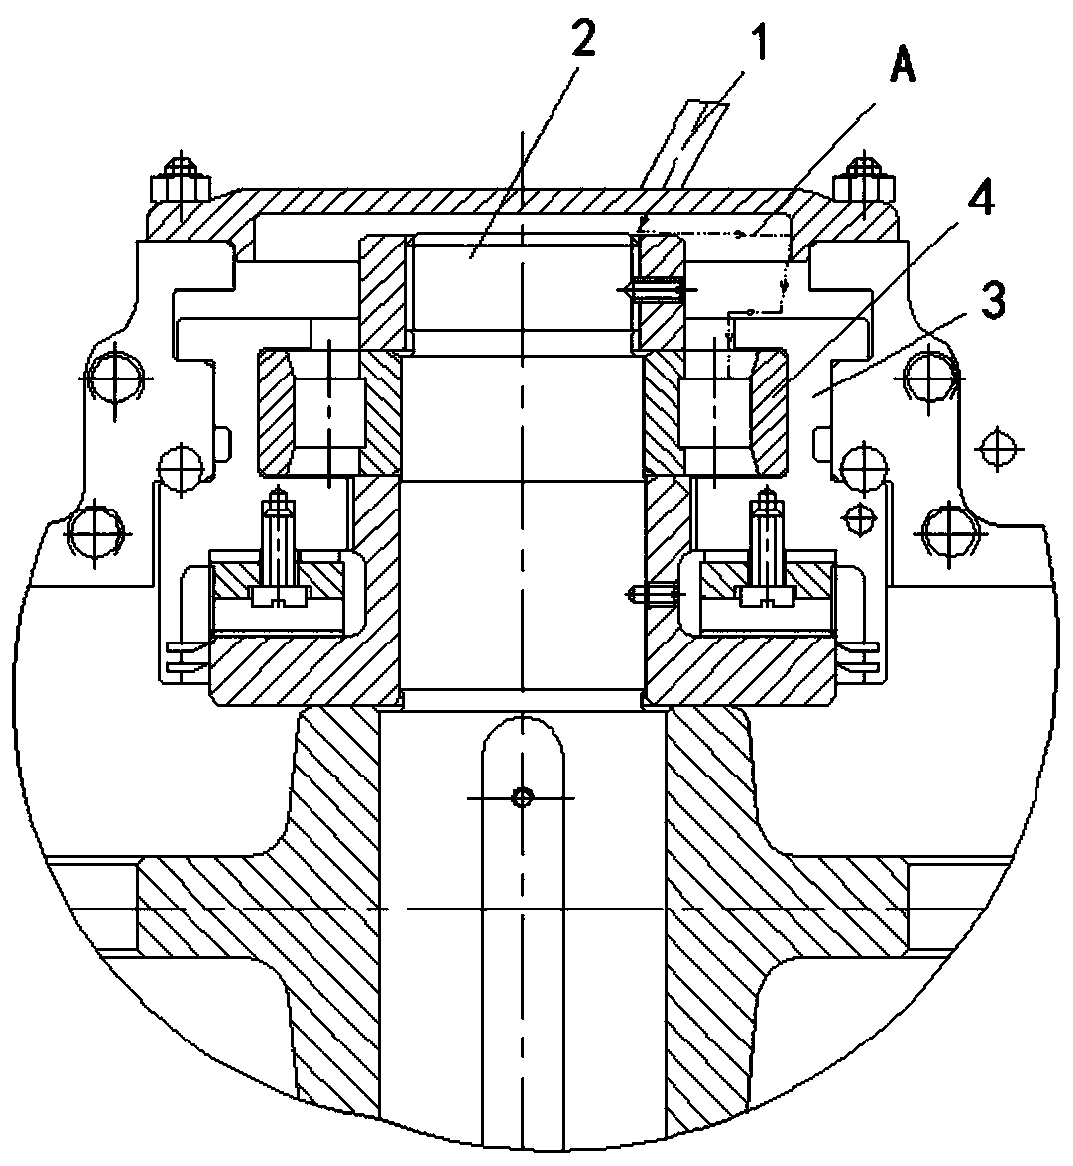 Circular-ring-shaped groove even oil supplying structure vertically provided with rolling bearings